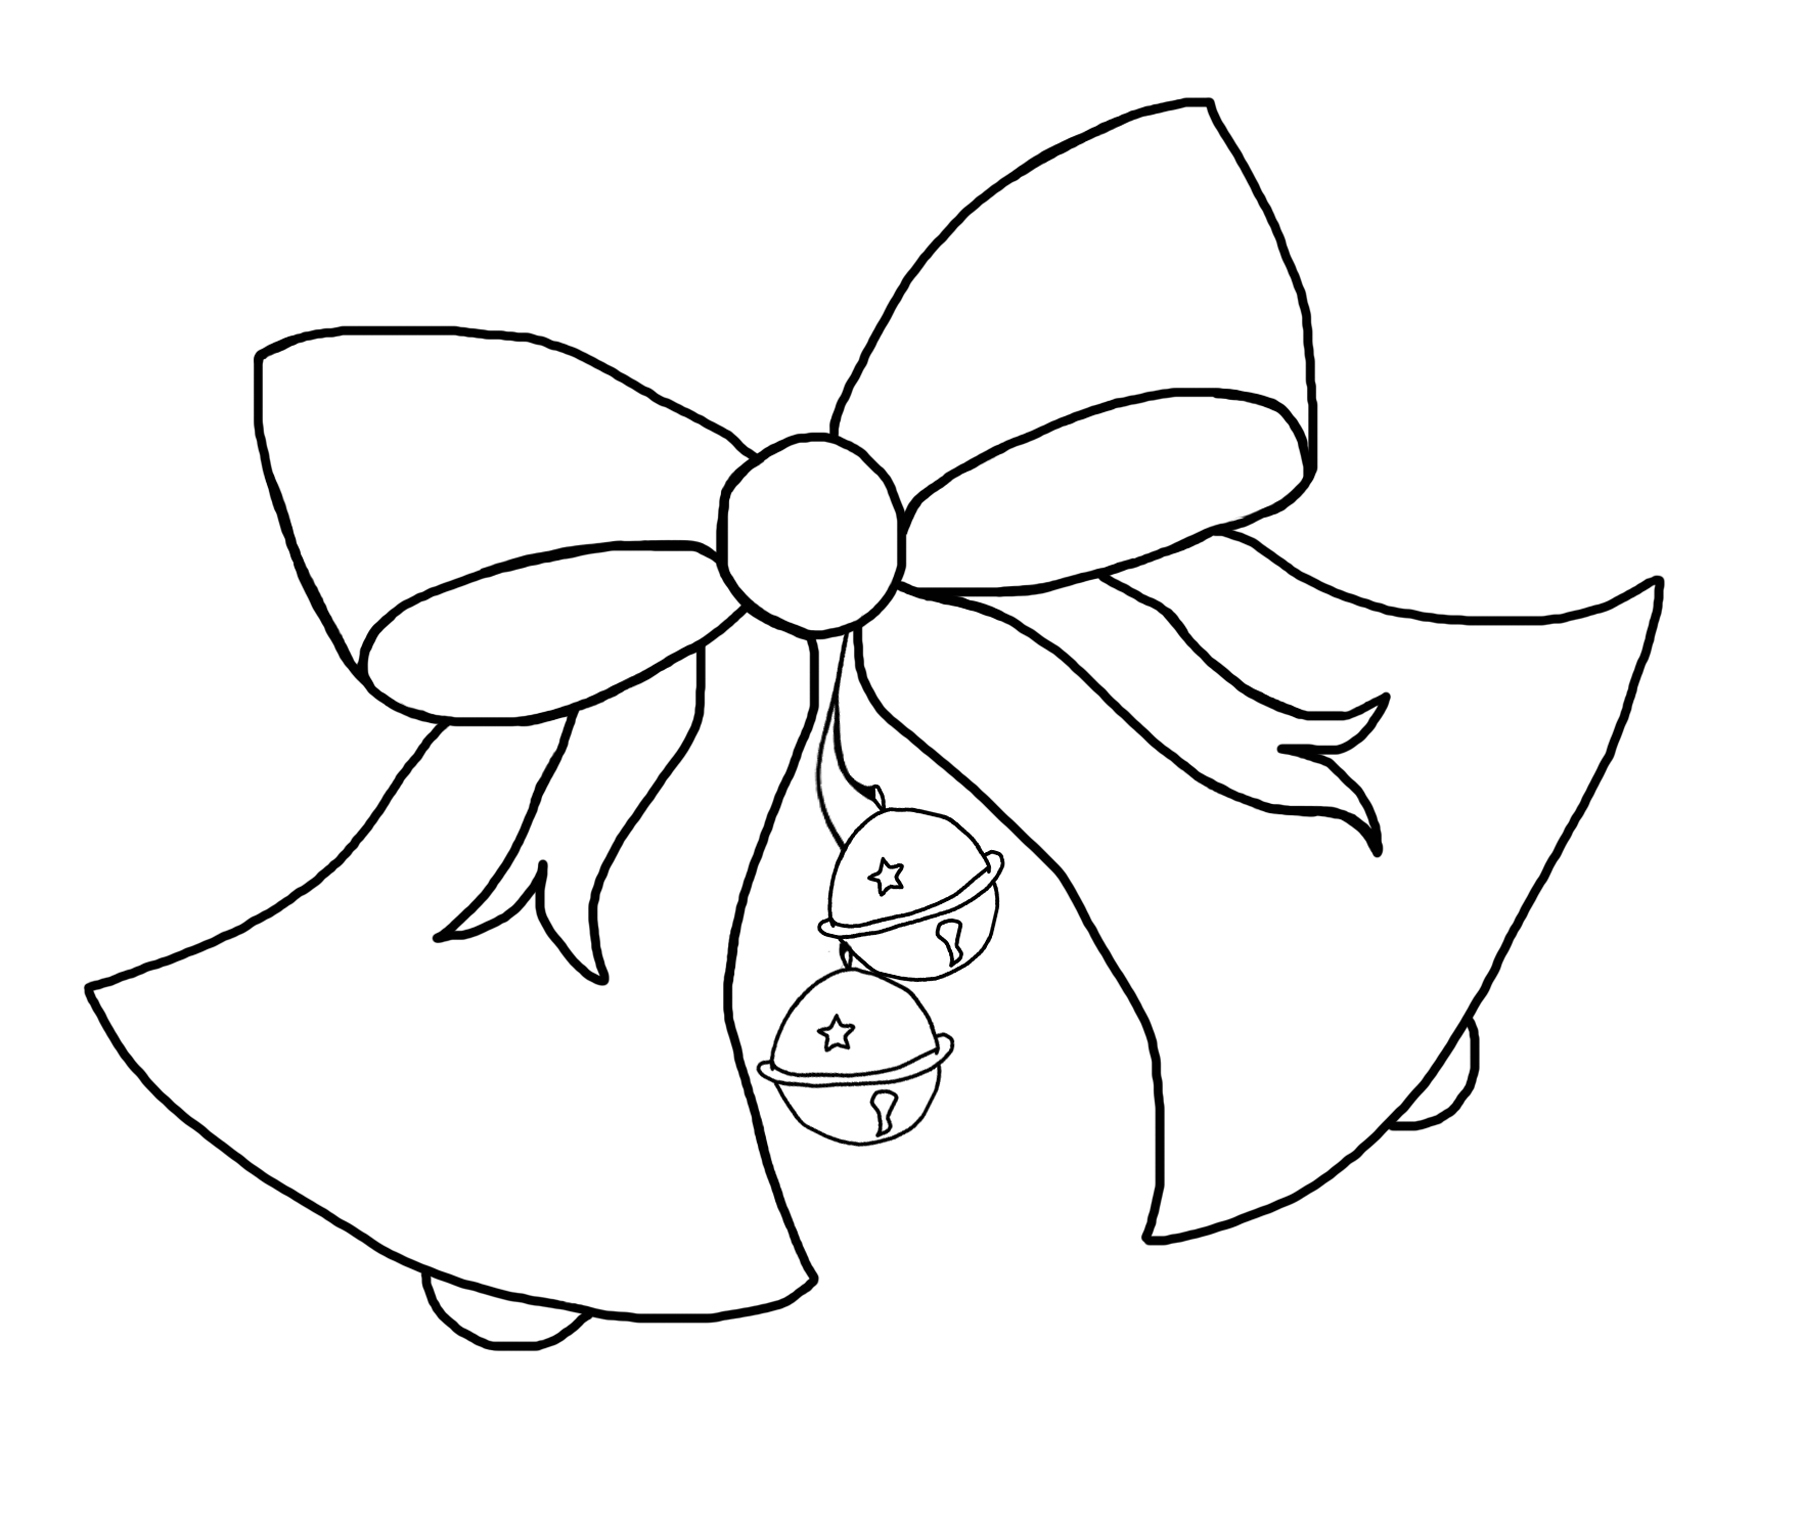 Blank Christmas Coloring Pages at GetDrawings | Free download